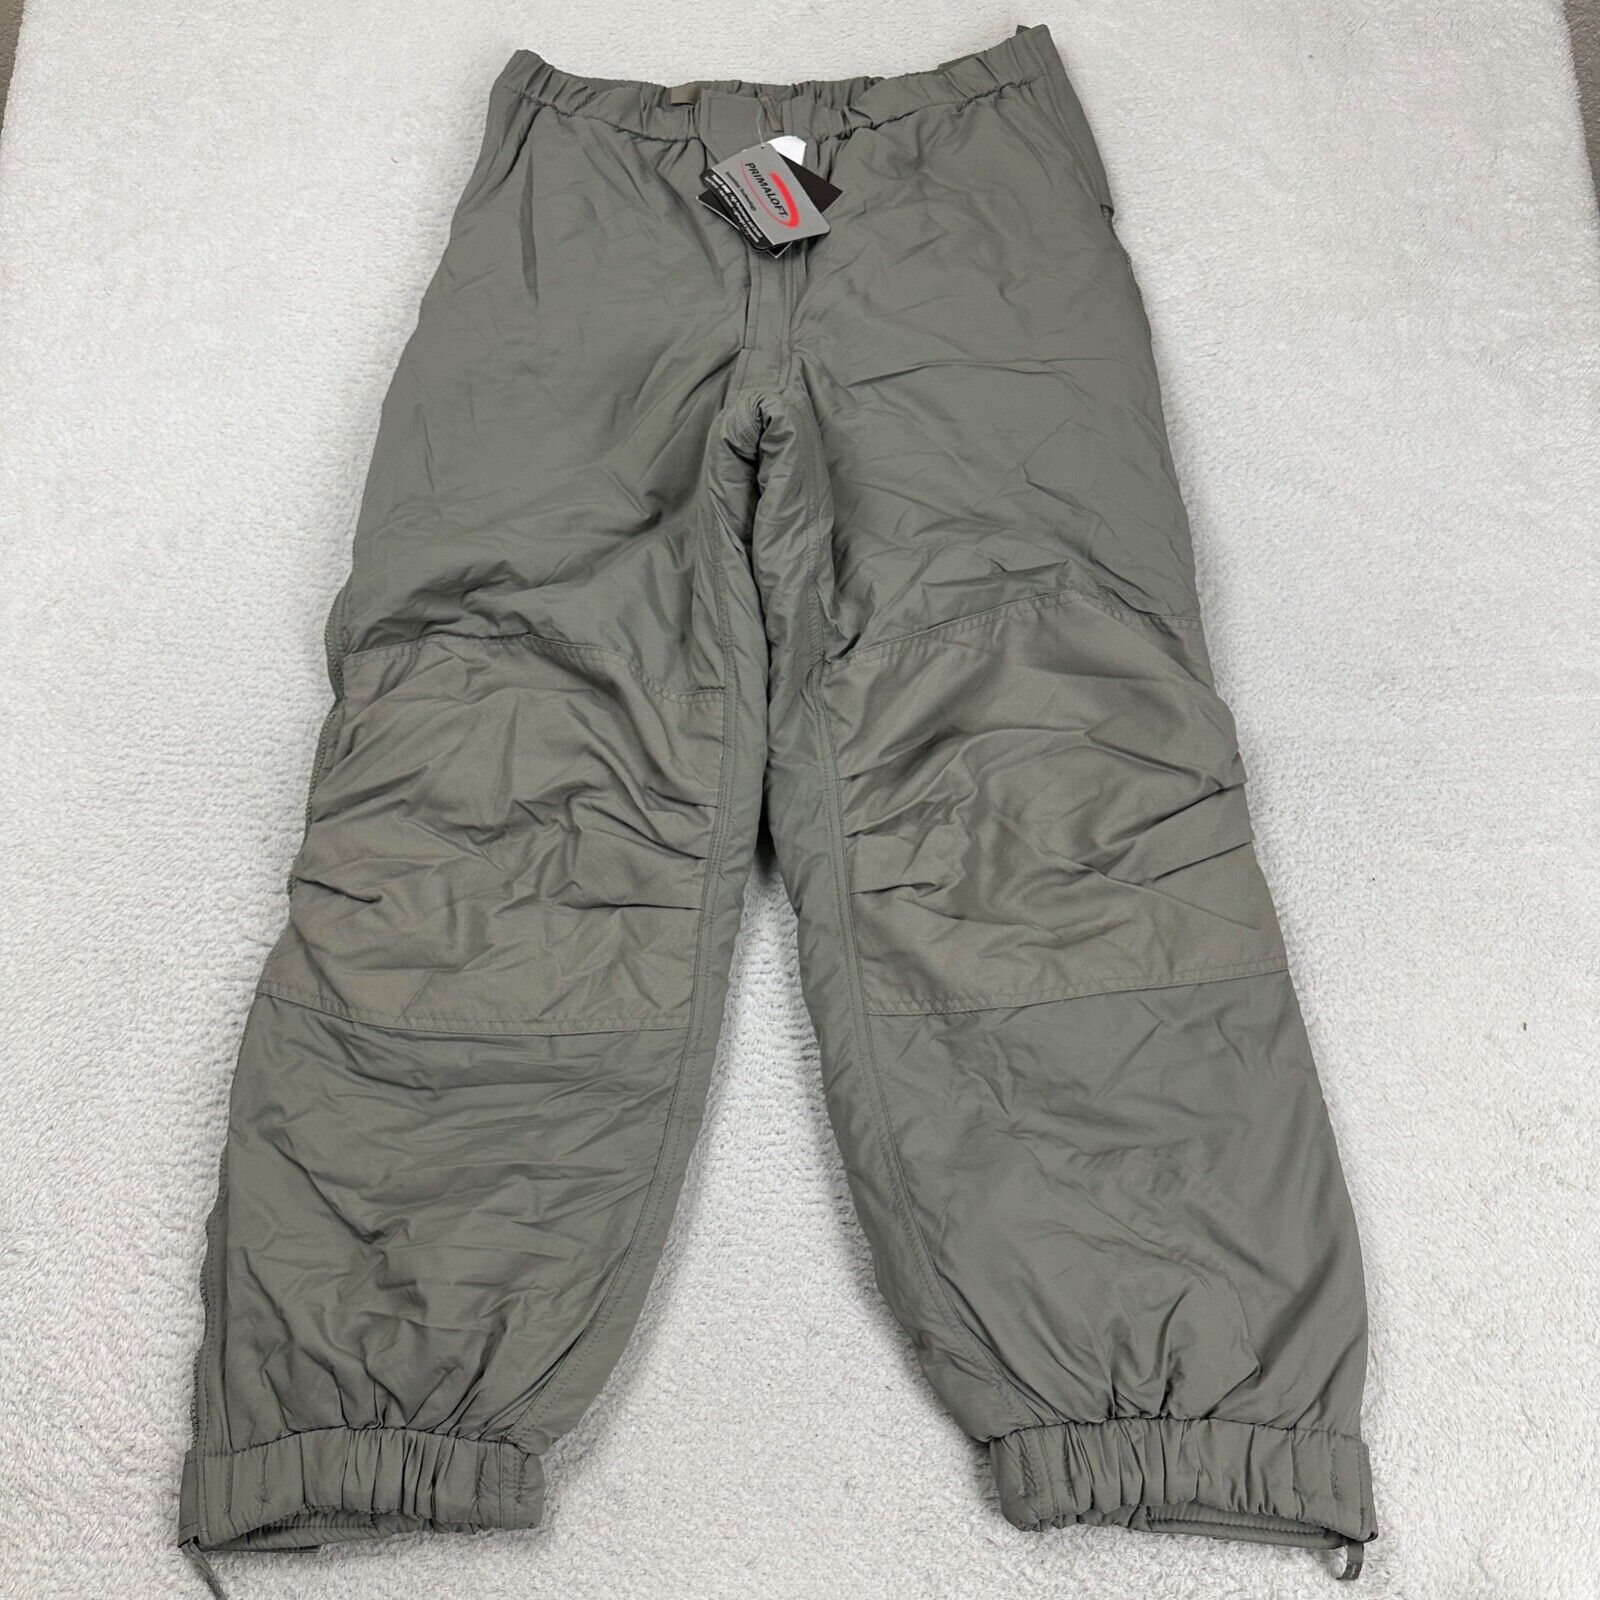 ECWCS Extreme Cold Weather Trousers Gen III Medium Long Pants Primaloft NEW